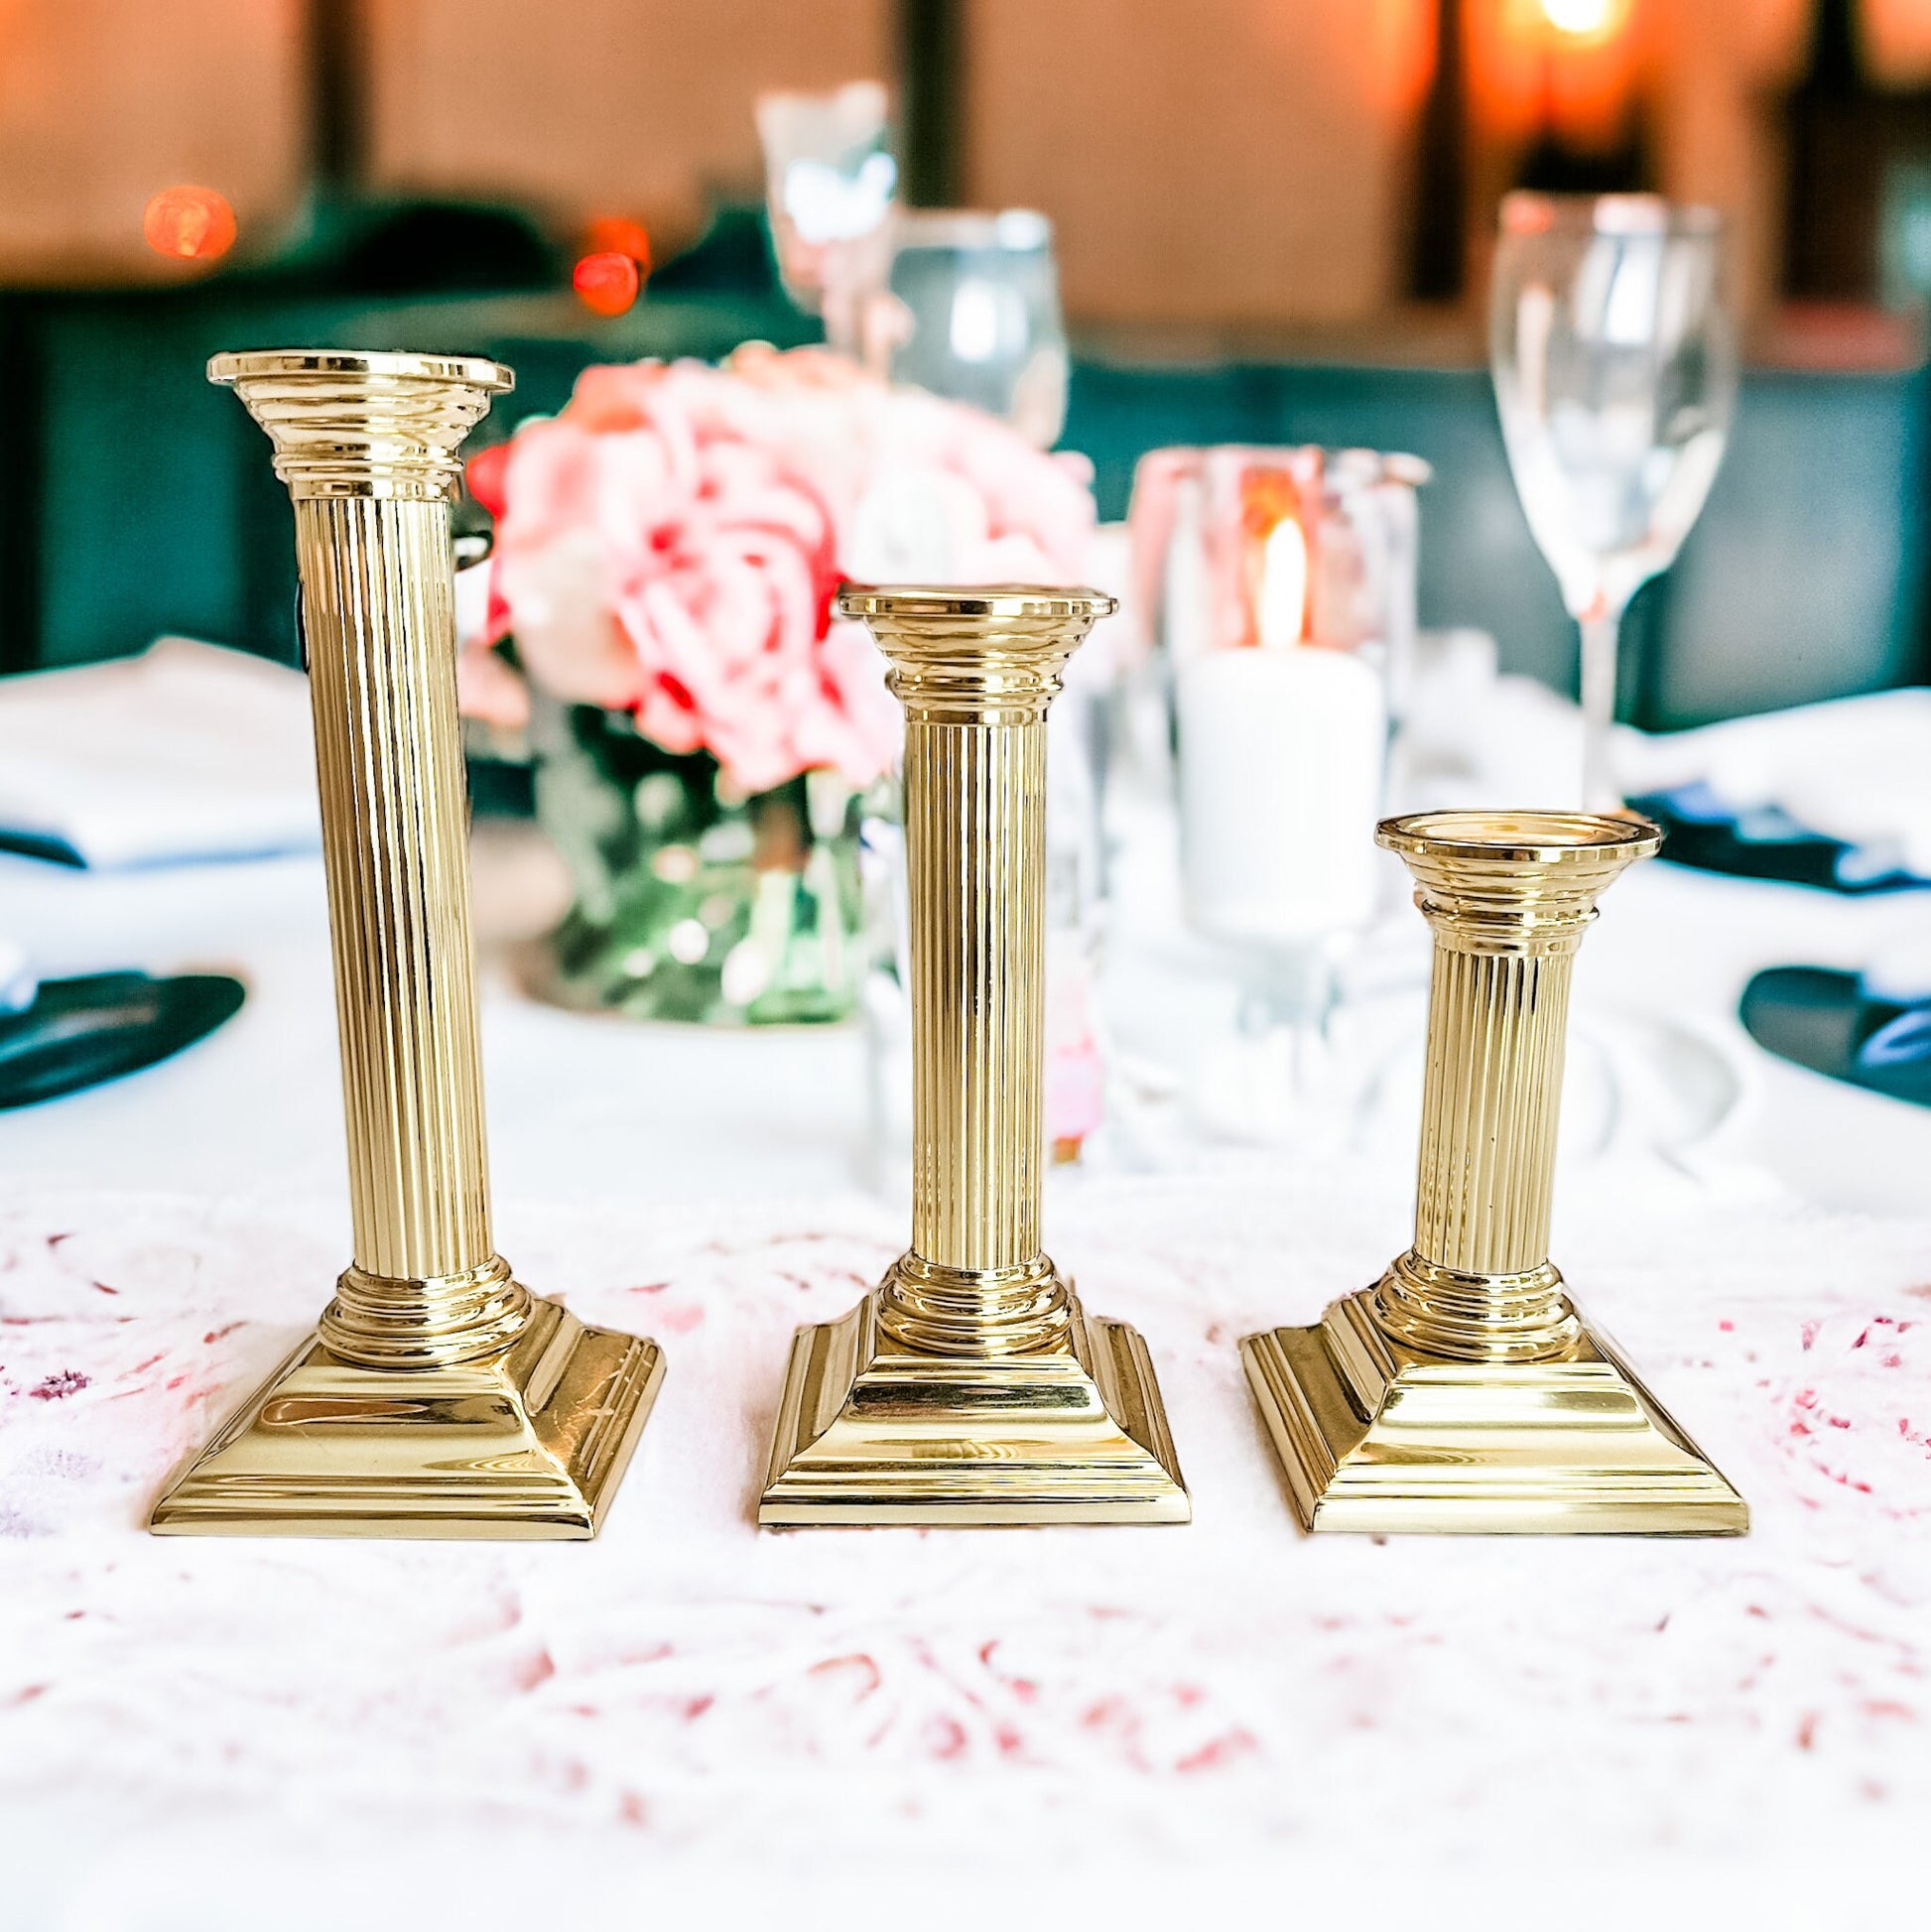 Vintage Brass Candle Holders, Candlesticks, Housewarming Gift, Best Friend Gifts